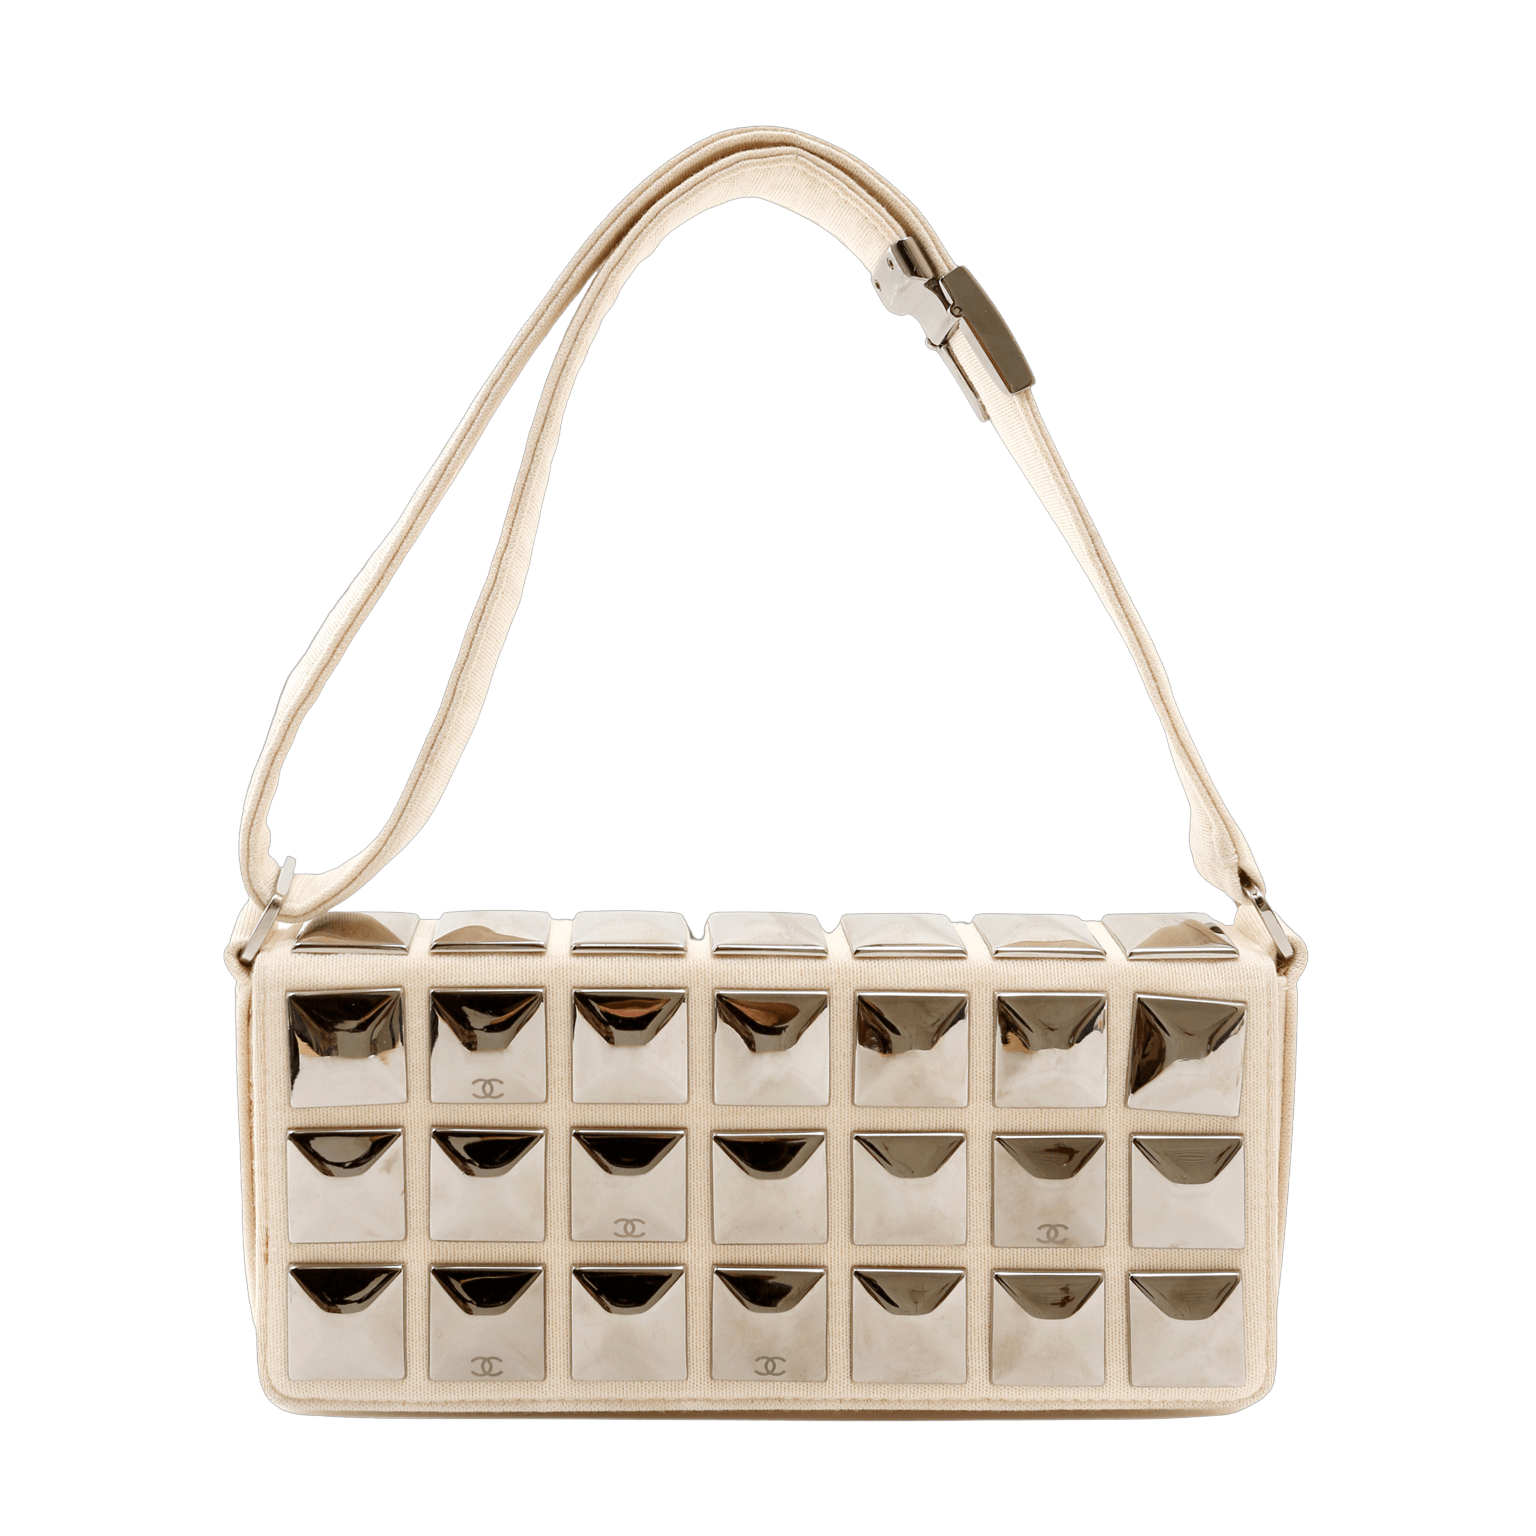 Chanel Minaudière, The Ultimate Show-Stopping Evening Bag, Handbags and  Accessories